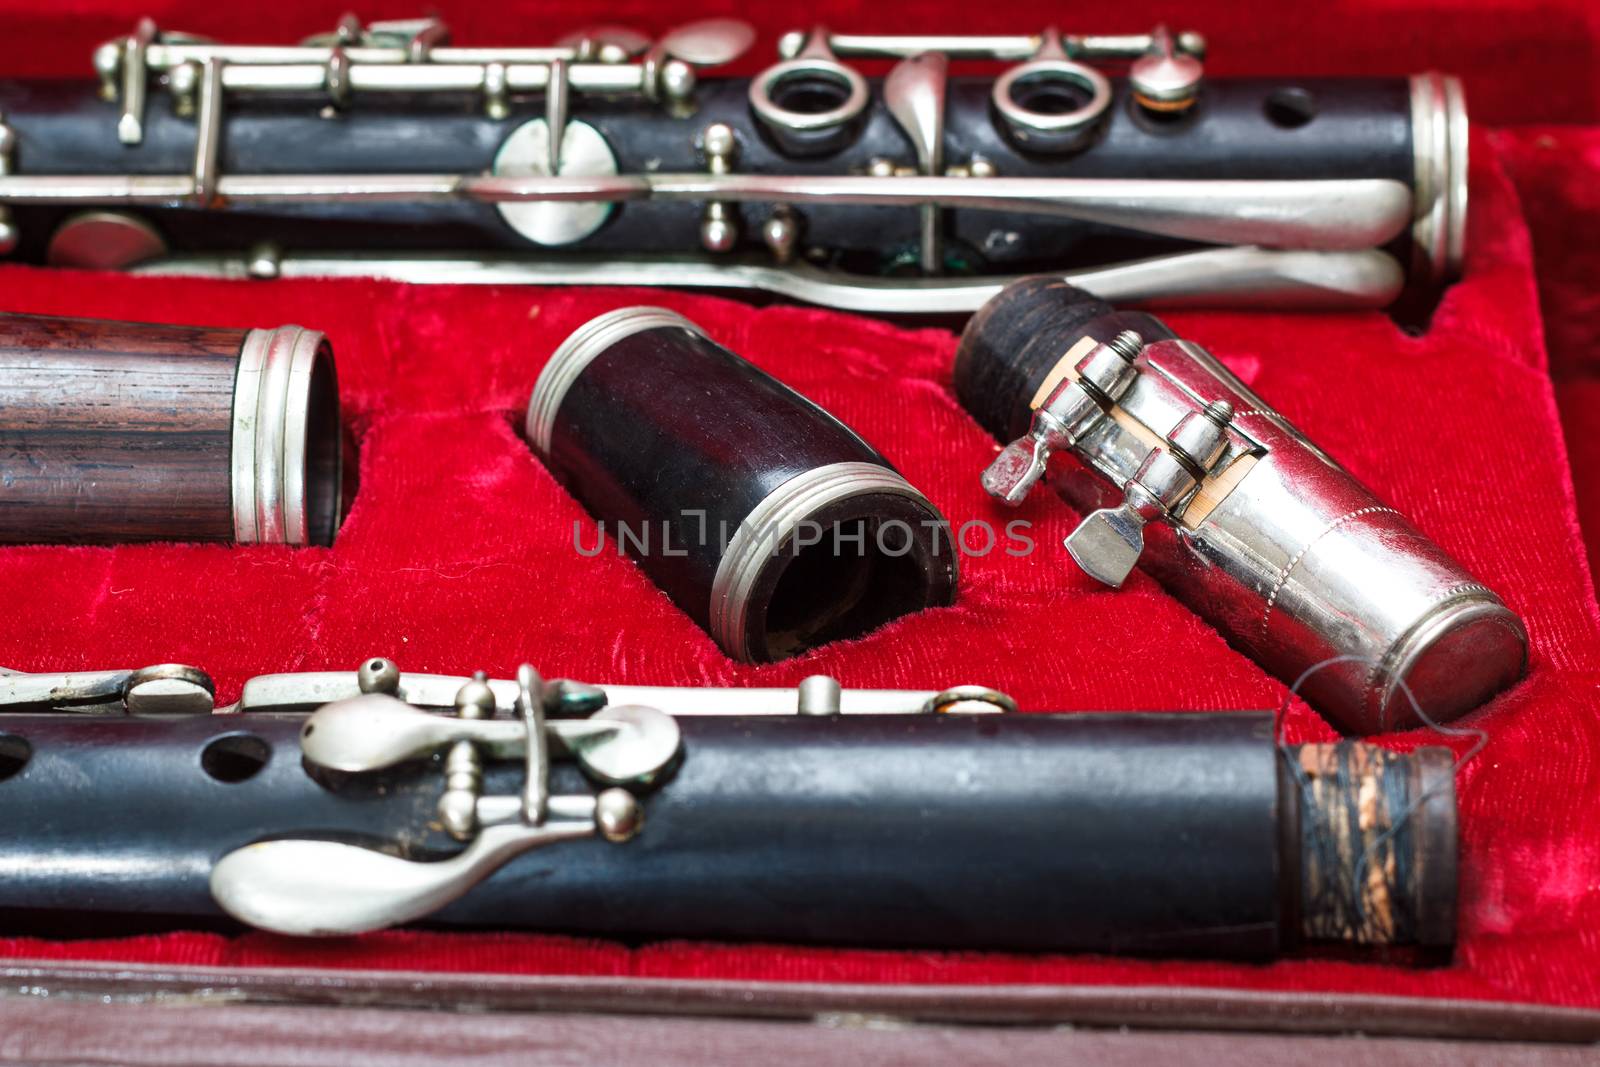 clarinet, wind instrument, disassembled and placed in the case